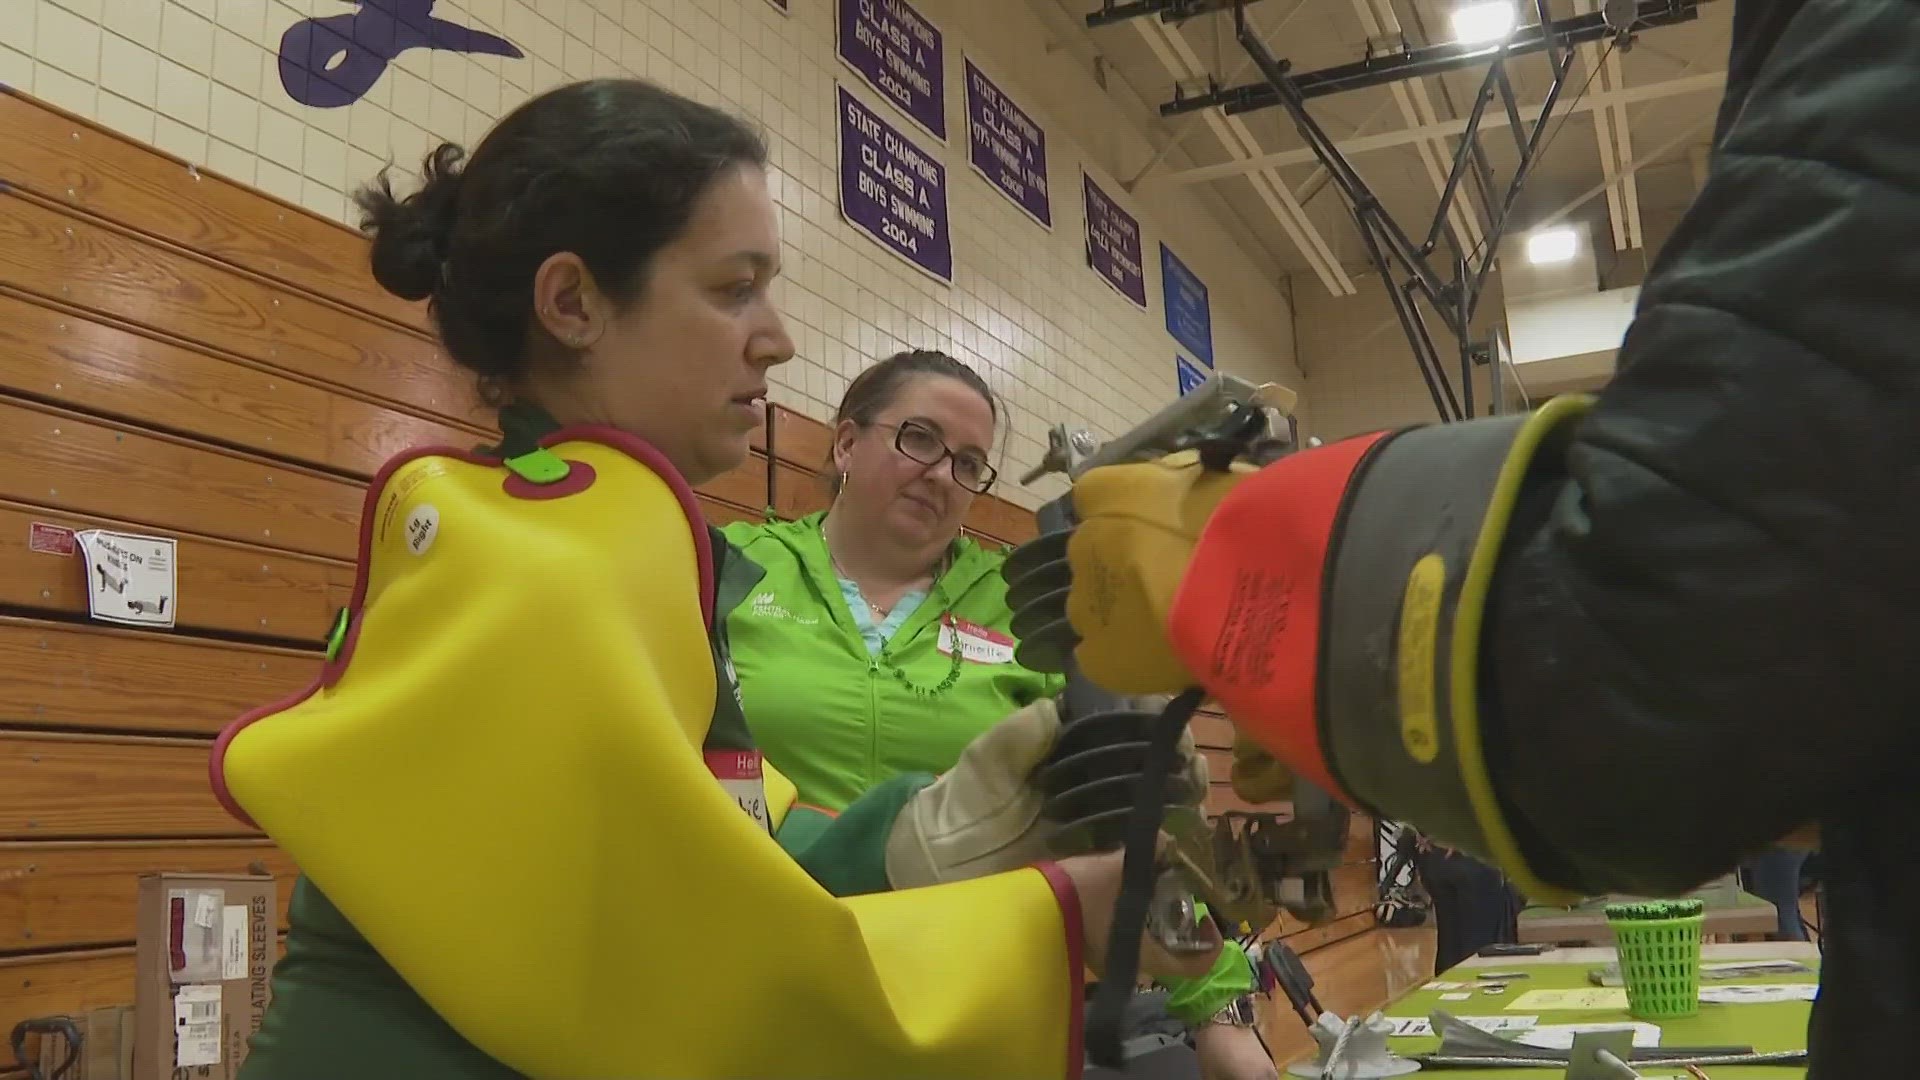 The job expo is part of a series of out-of-class career opportunities at Deering High School.